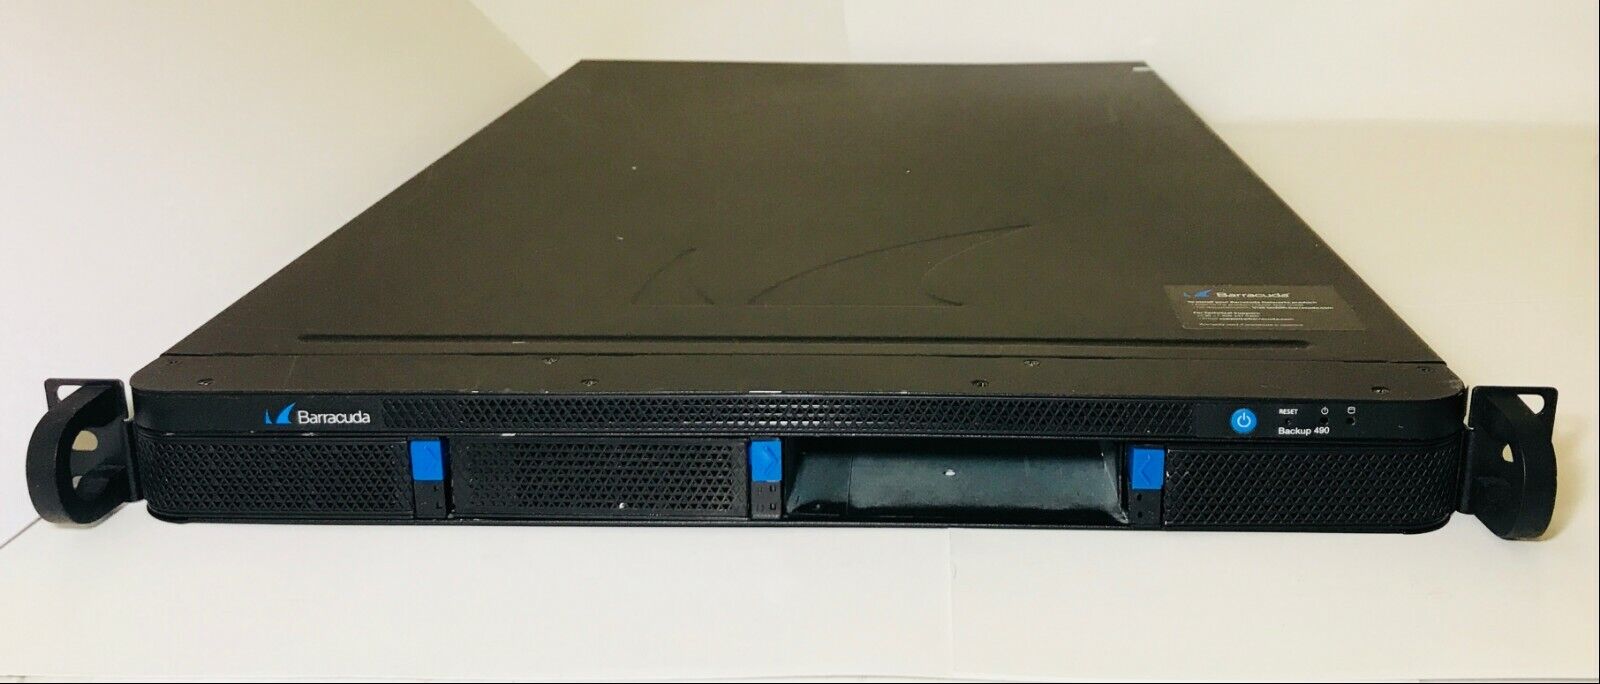 Barracuda BBS490a Networks Backup Server BNHW004 with (x3) 4TB HDDs 